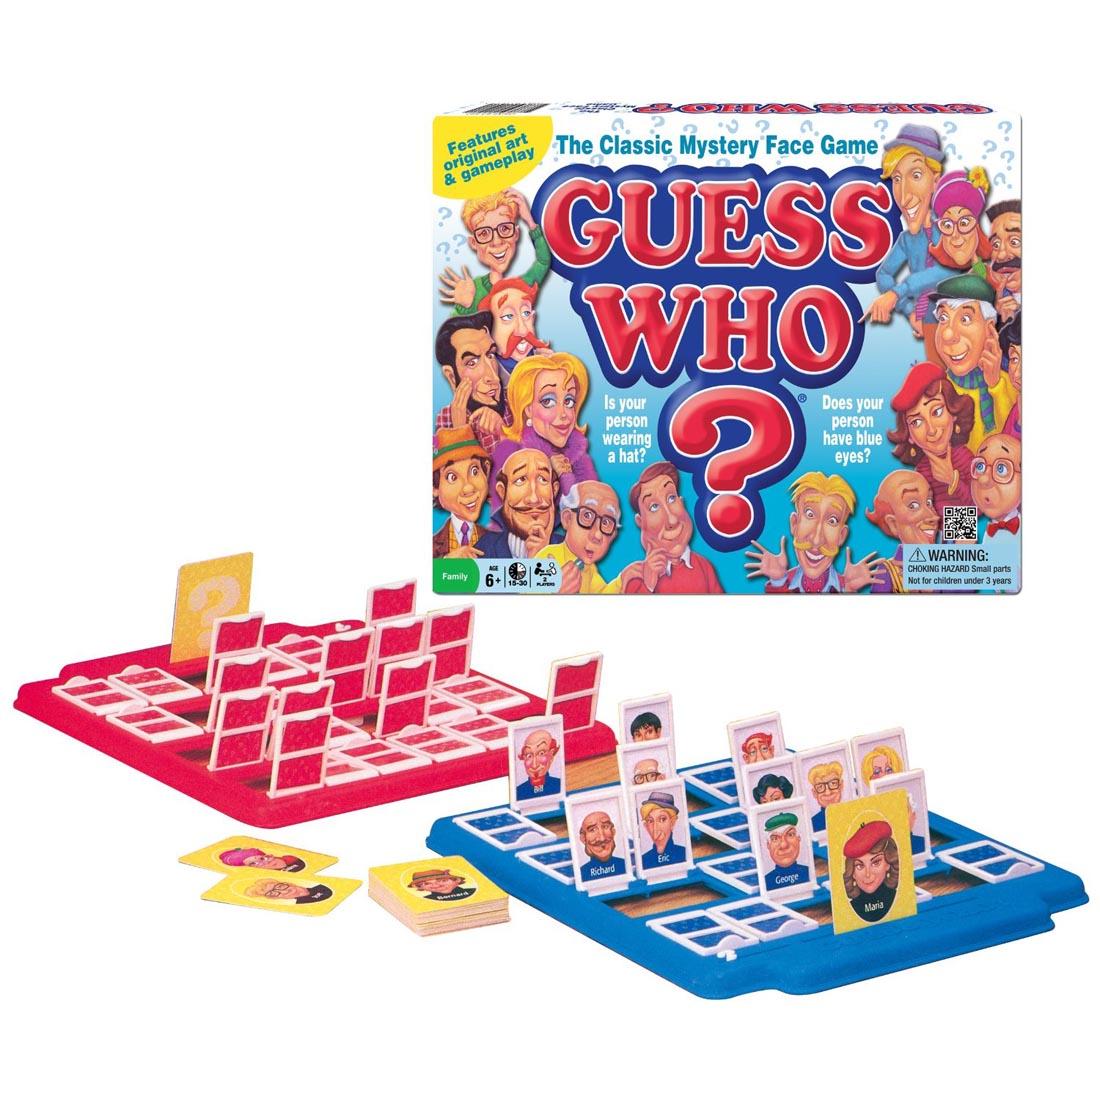 box and contents of Guess Who? Game